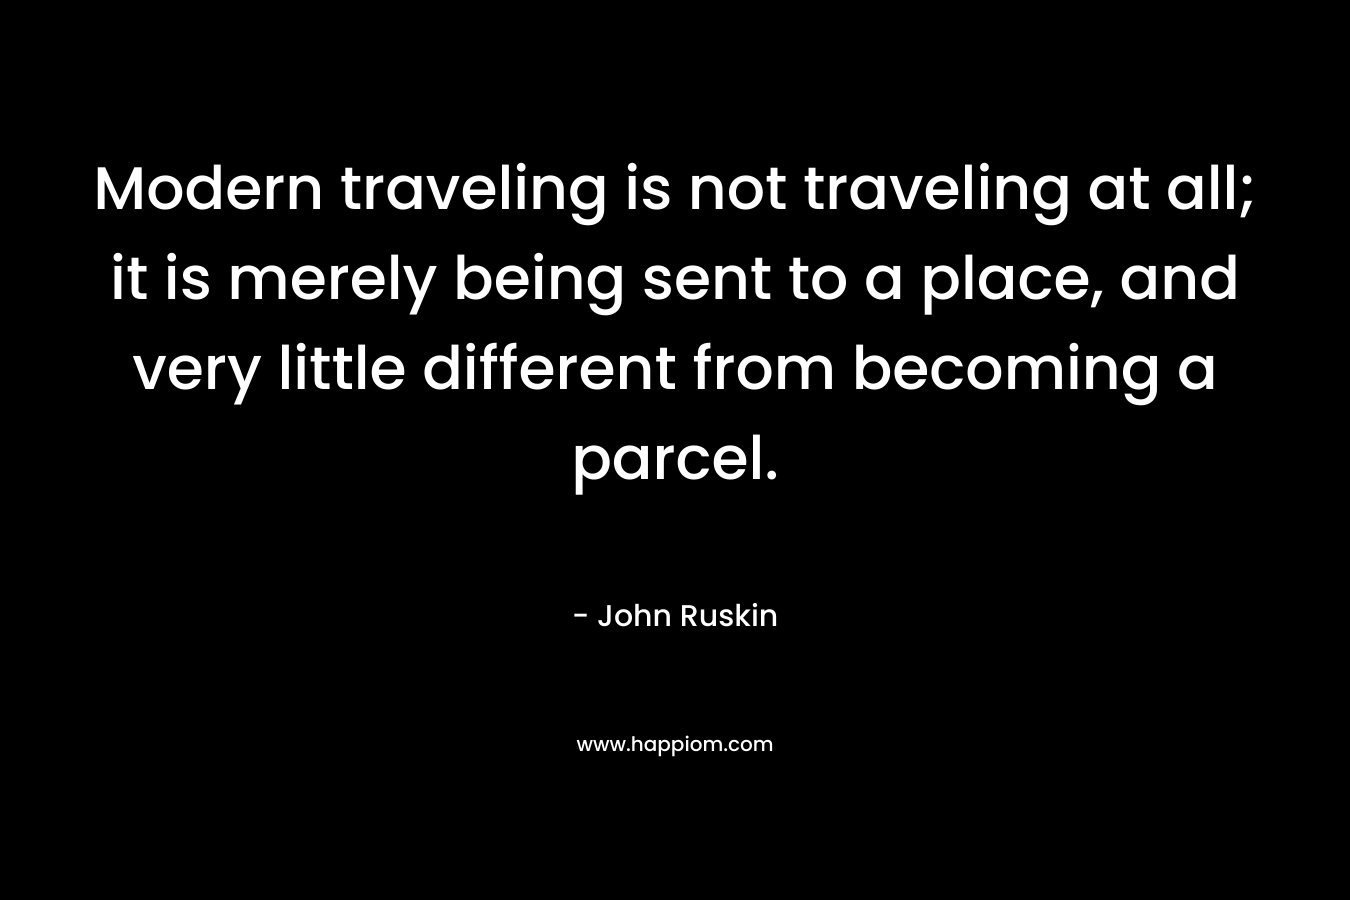 Modern traveling is not traveling at all; it is merely being sent to a place, and very little different from becoming a parcel. – John Ruskin